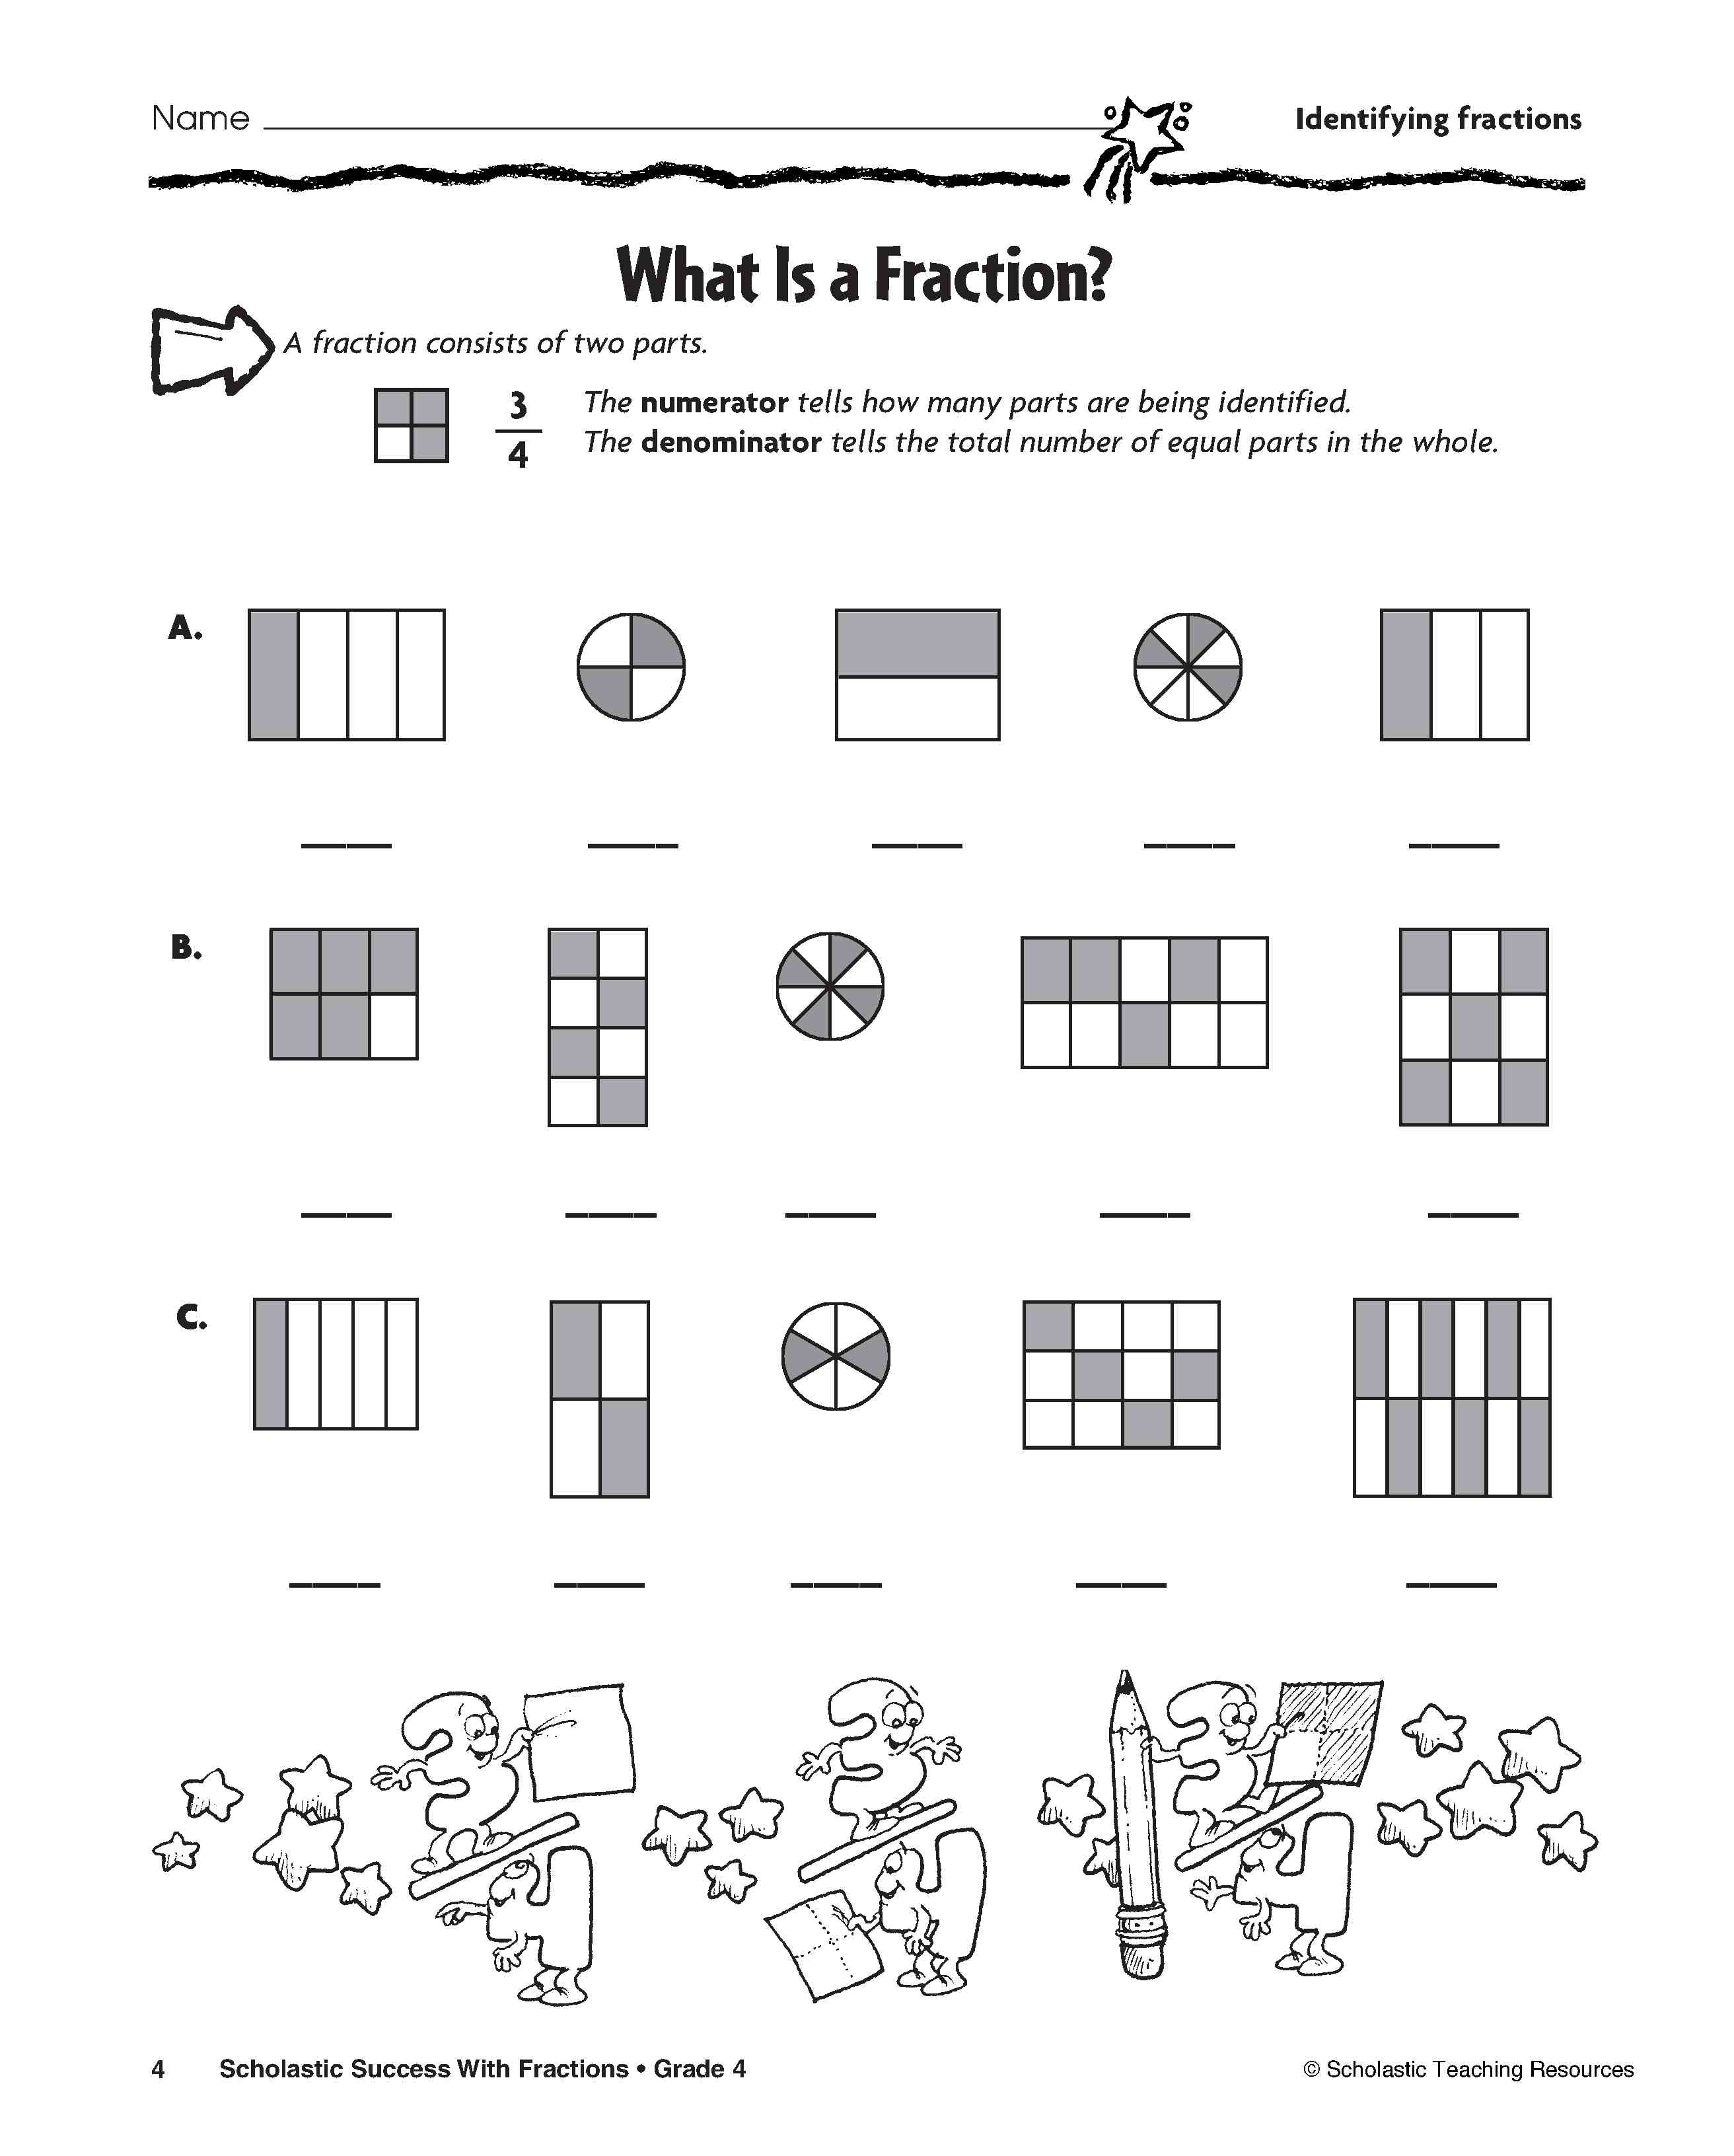 Critical Thinking Activities Printables - Critical Thinking Worksheets - Free Printable Critical Thinking Puzzles